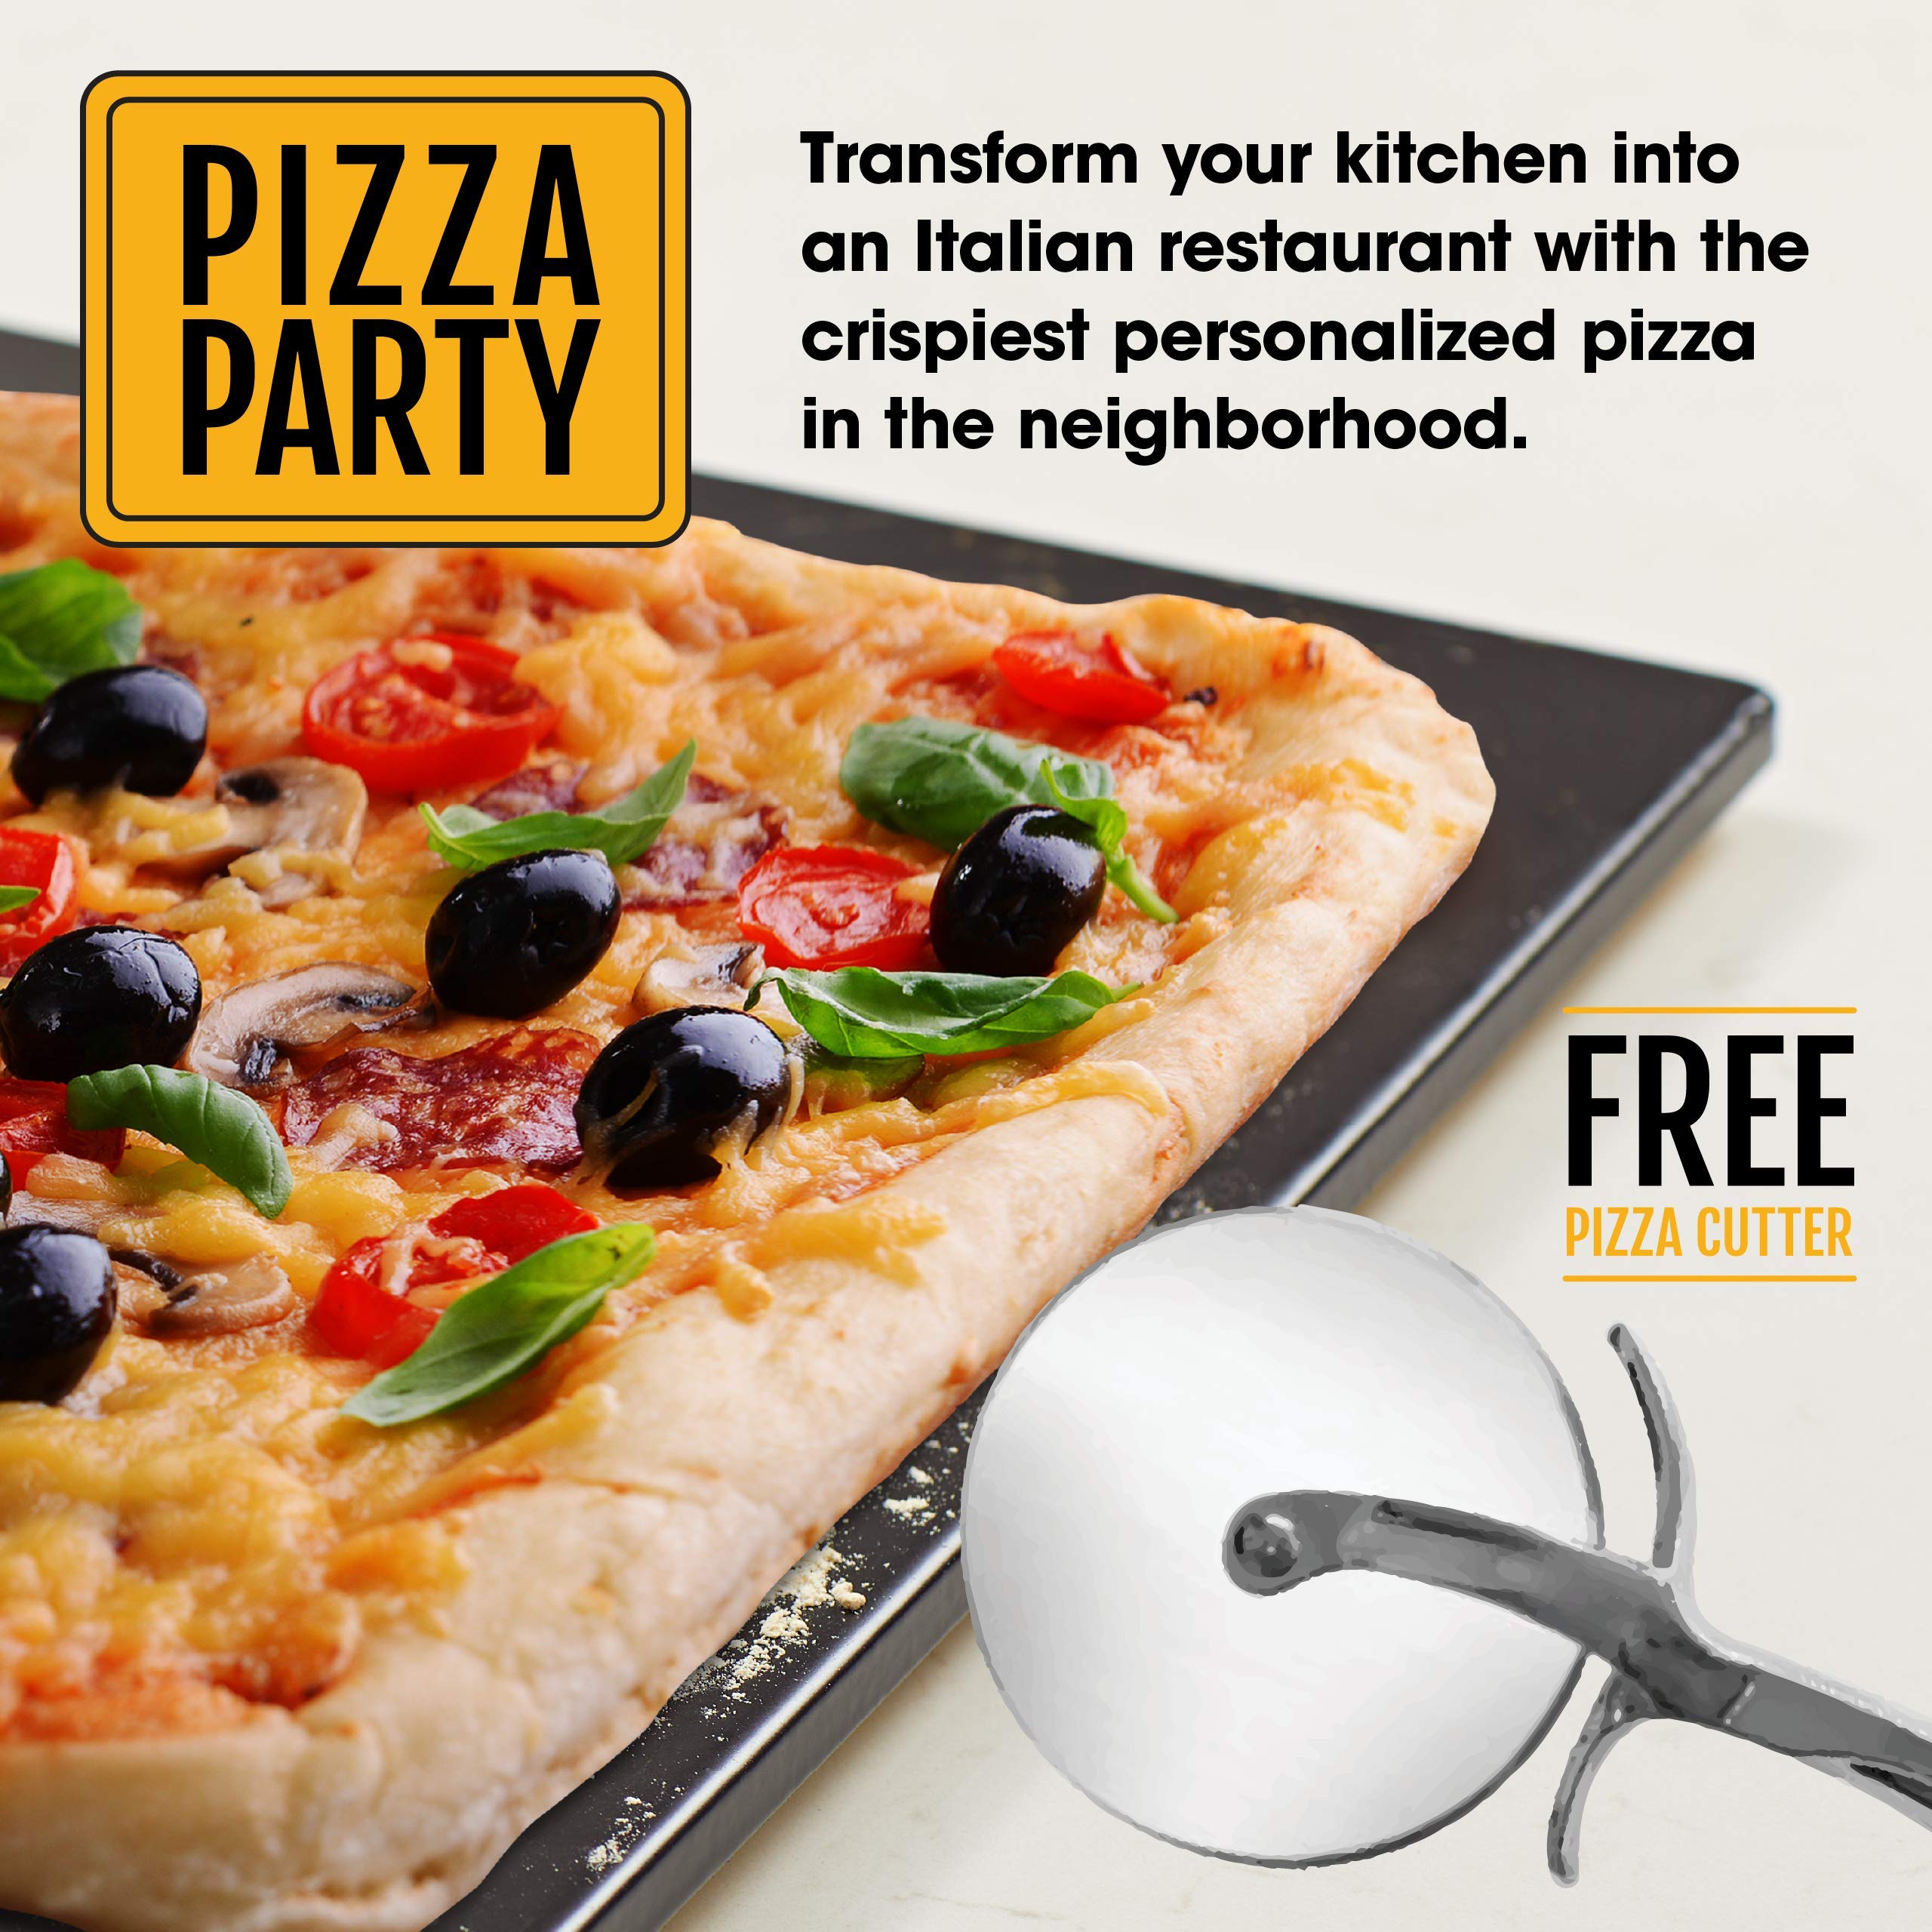 Heritage Square Pizza Stone - Pizza & Bread Baking Stones For Gas Grill, Oven Baking - Black Ceramic Pan, Stainless, No-Smoke - Wheel Pizza Cutter - Housewarming Gifts